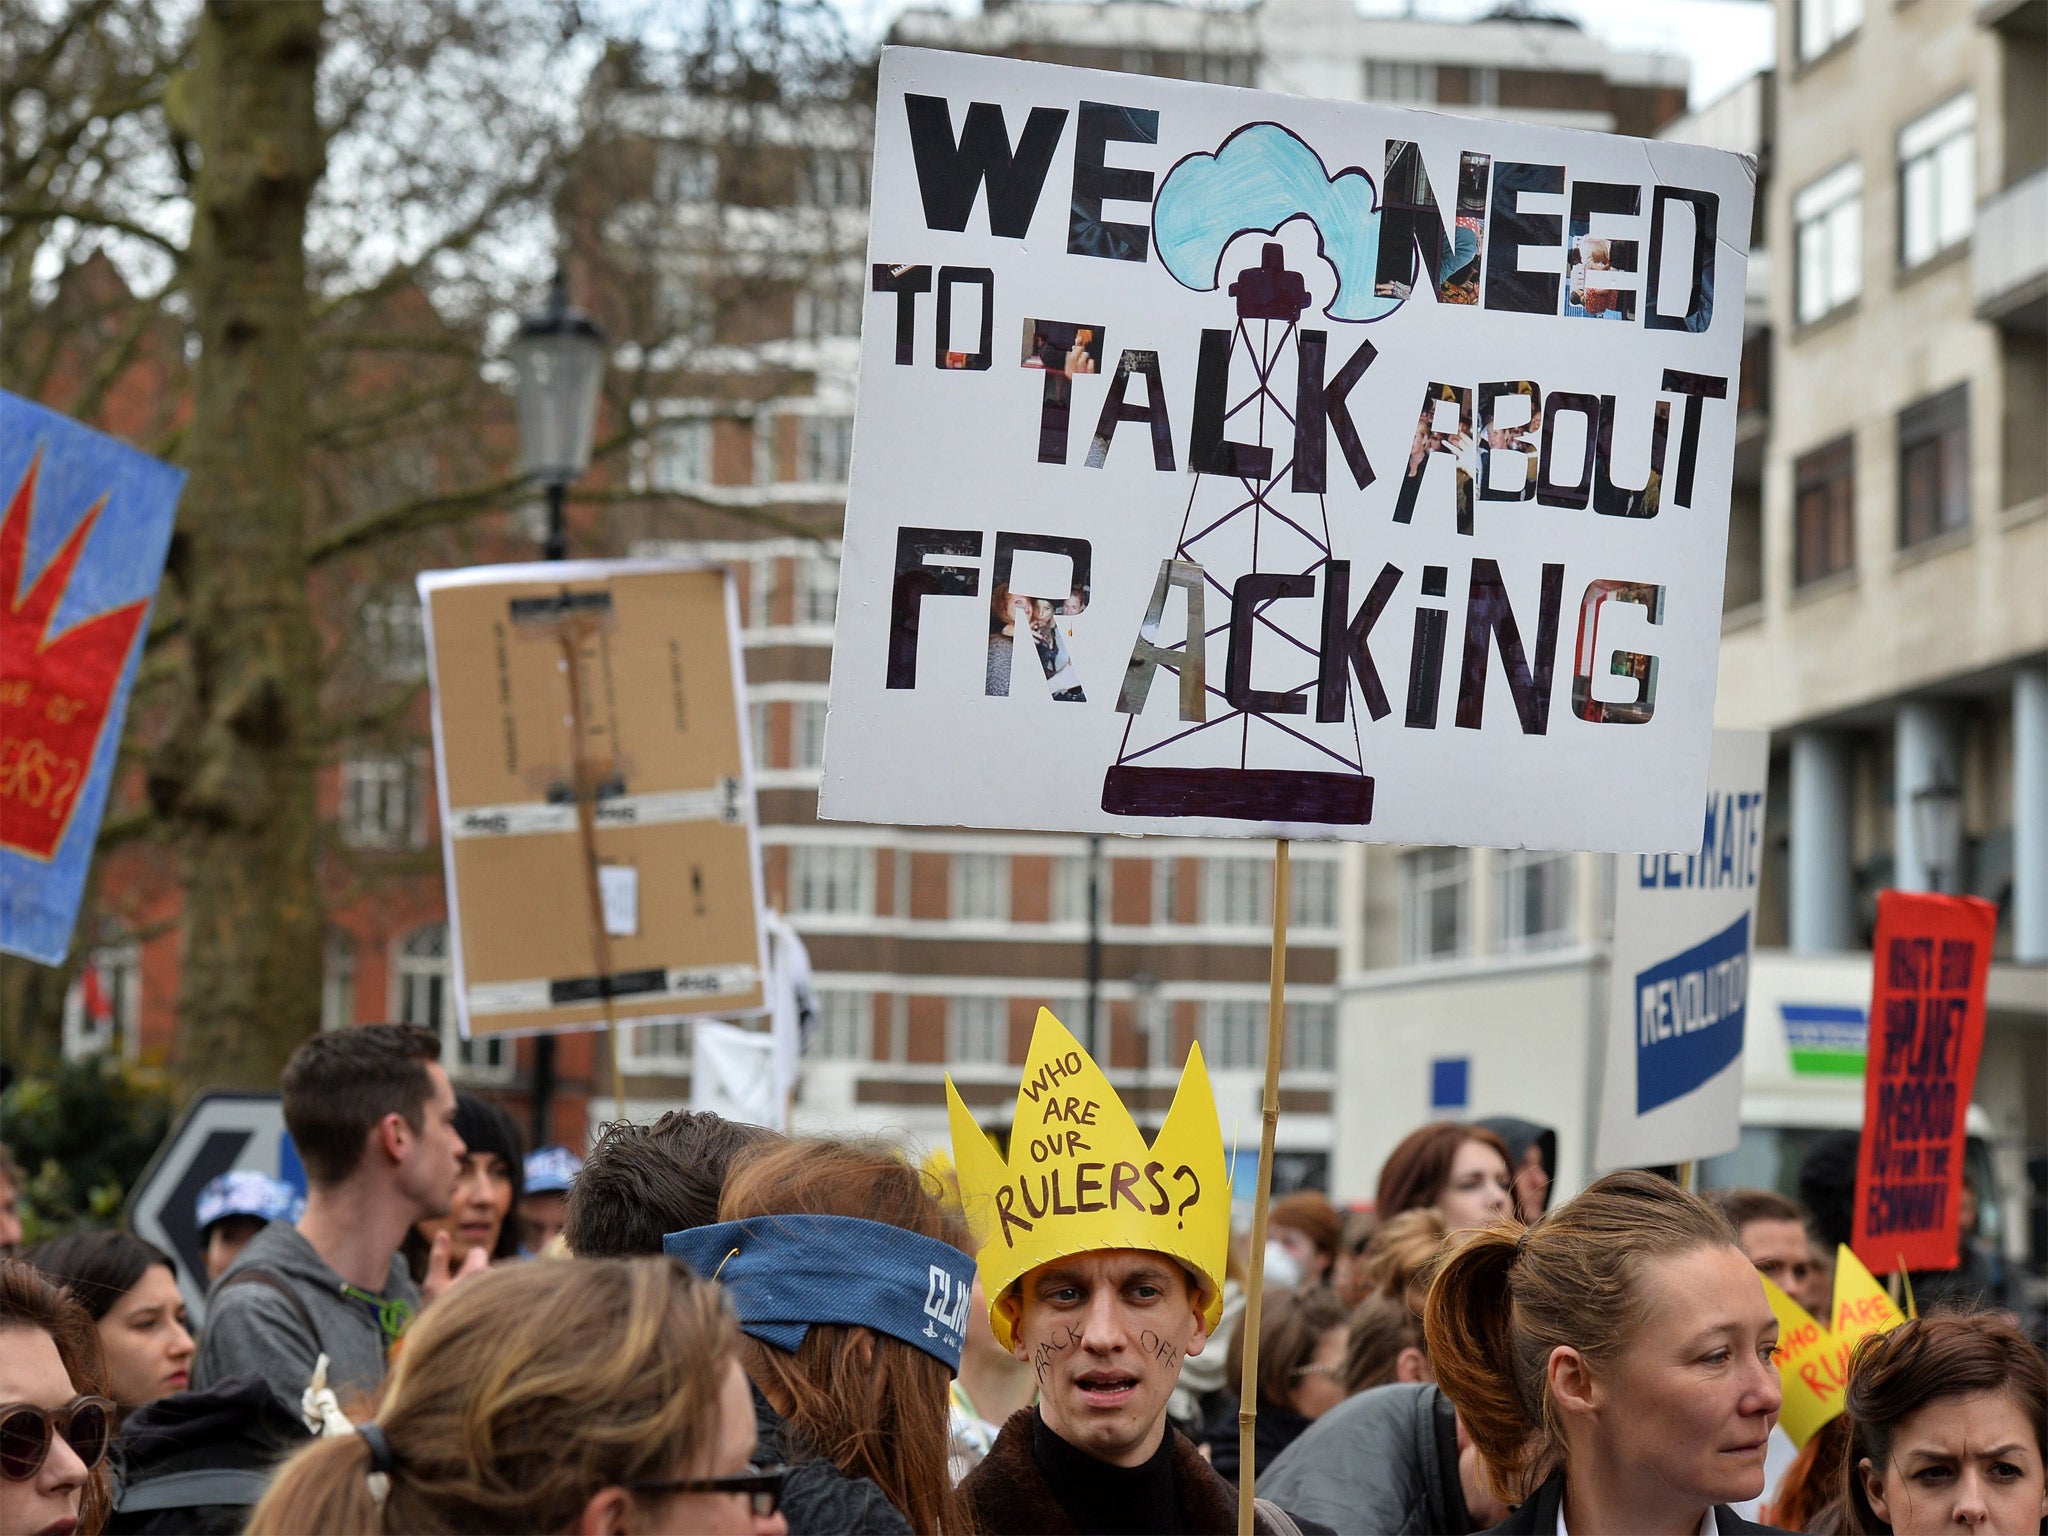 Demonstrators carry placards as they gather for an anti-fracking protest in London last week